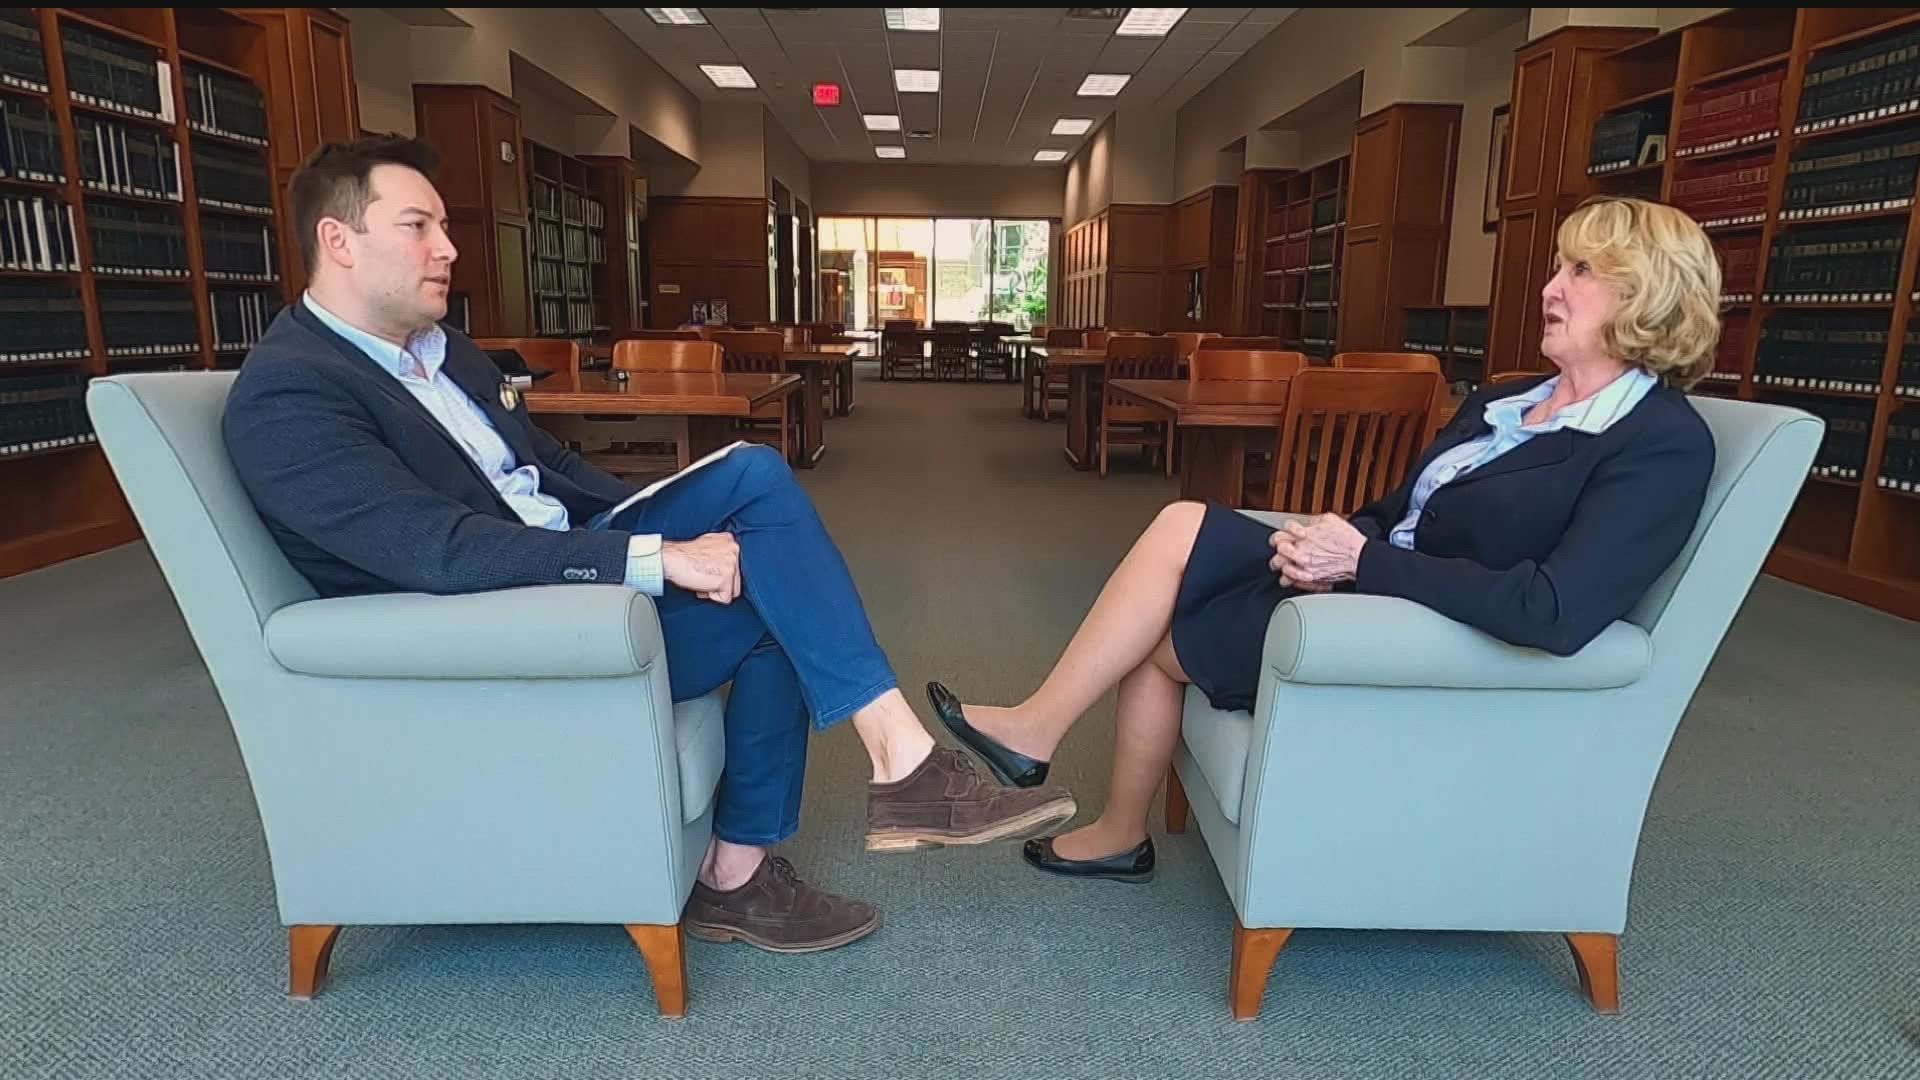 Teresa Collett sits down with KARE 11's Chris Hrapsky to discuss the Supreme Court's decision to overturn Roe v. Wade.